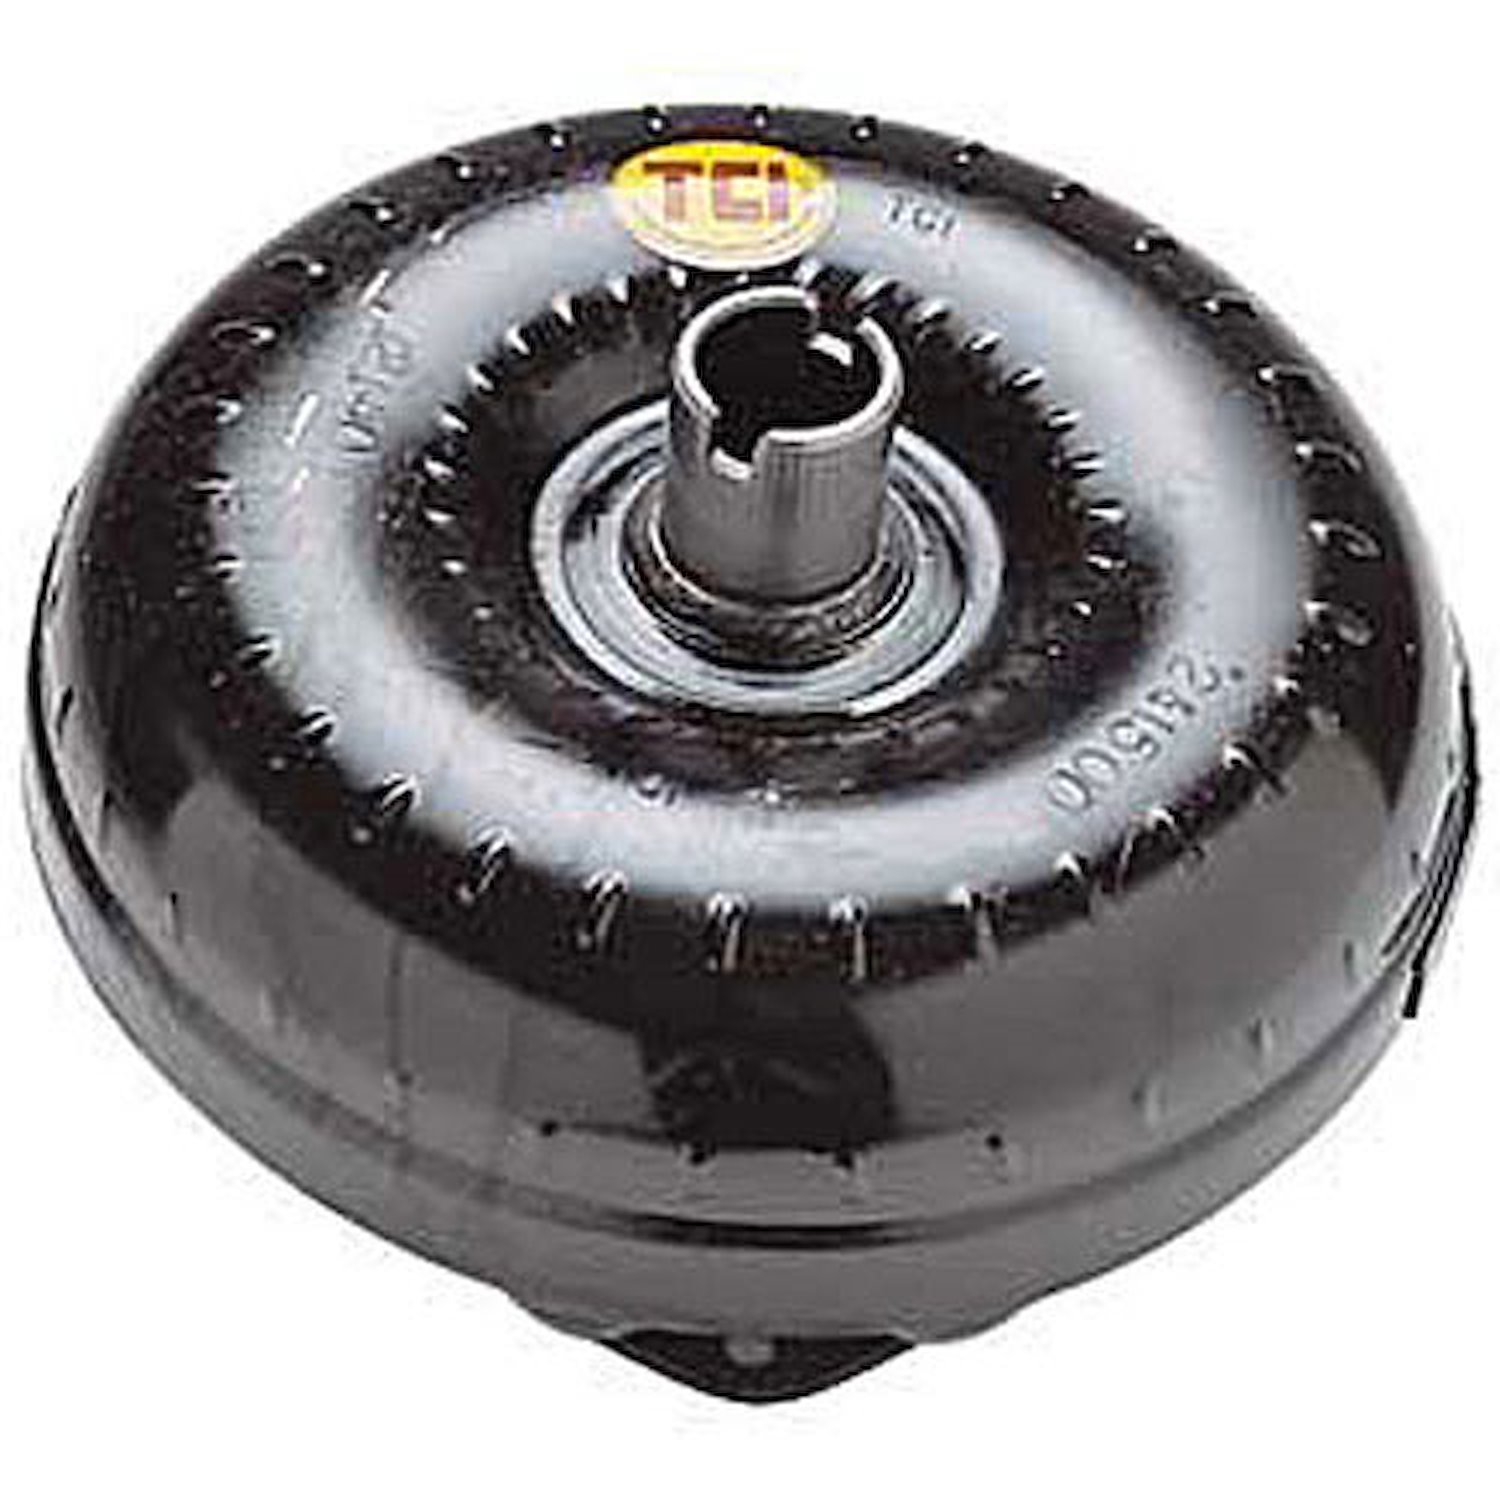 10" Super Streetfighter Torque Converter 1965-81 GM TH350/TH375 Small Bolt Pattern (Except Lock-up)